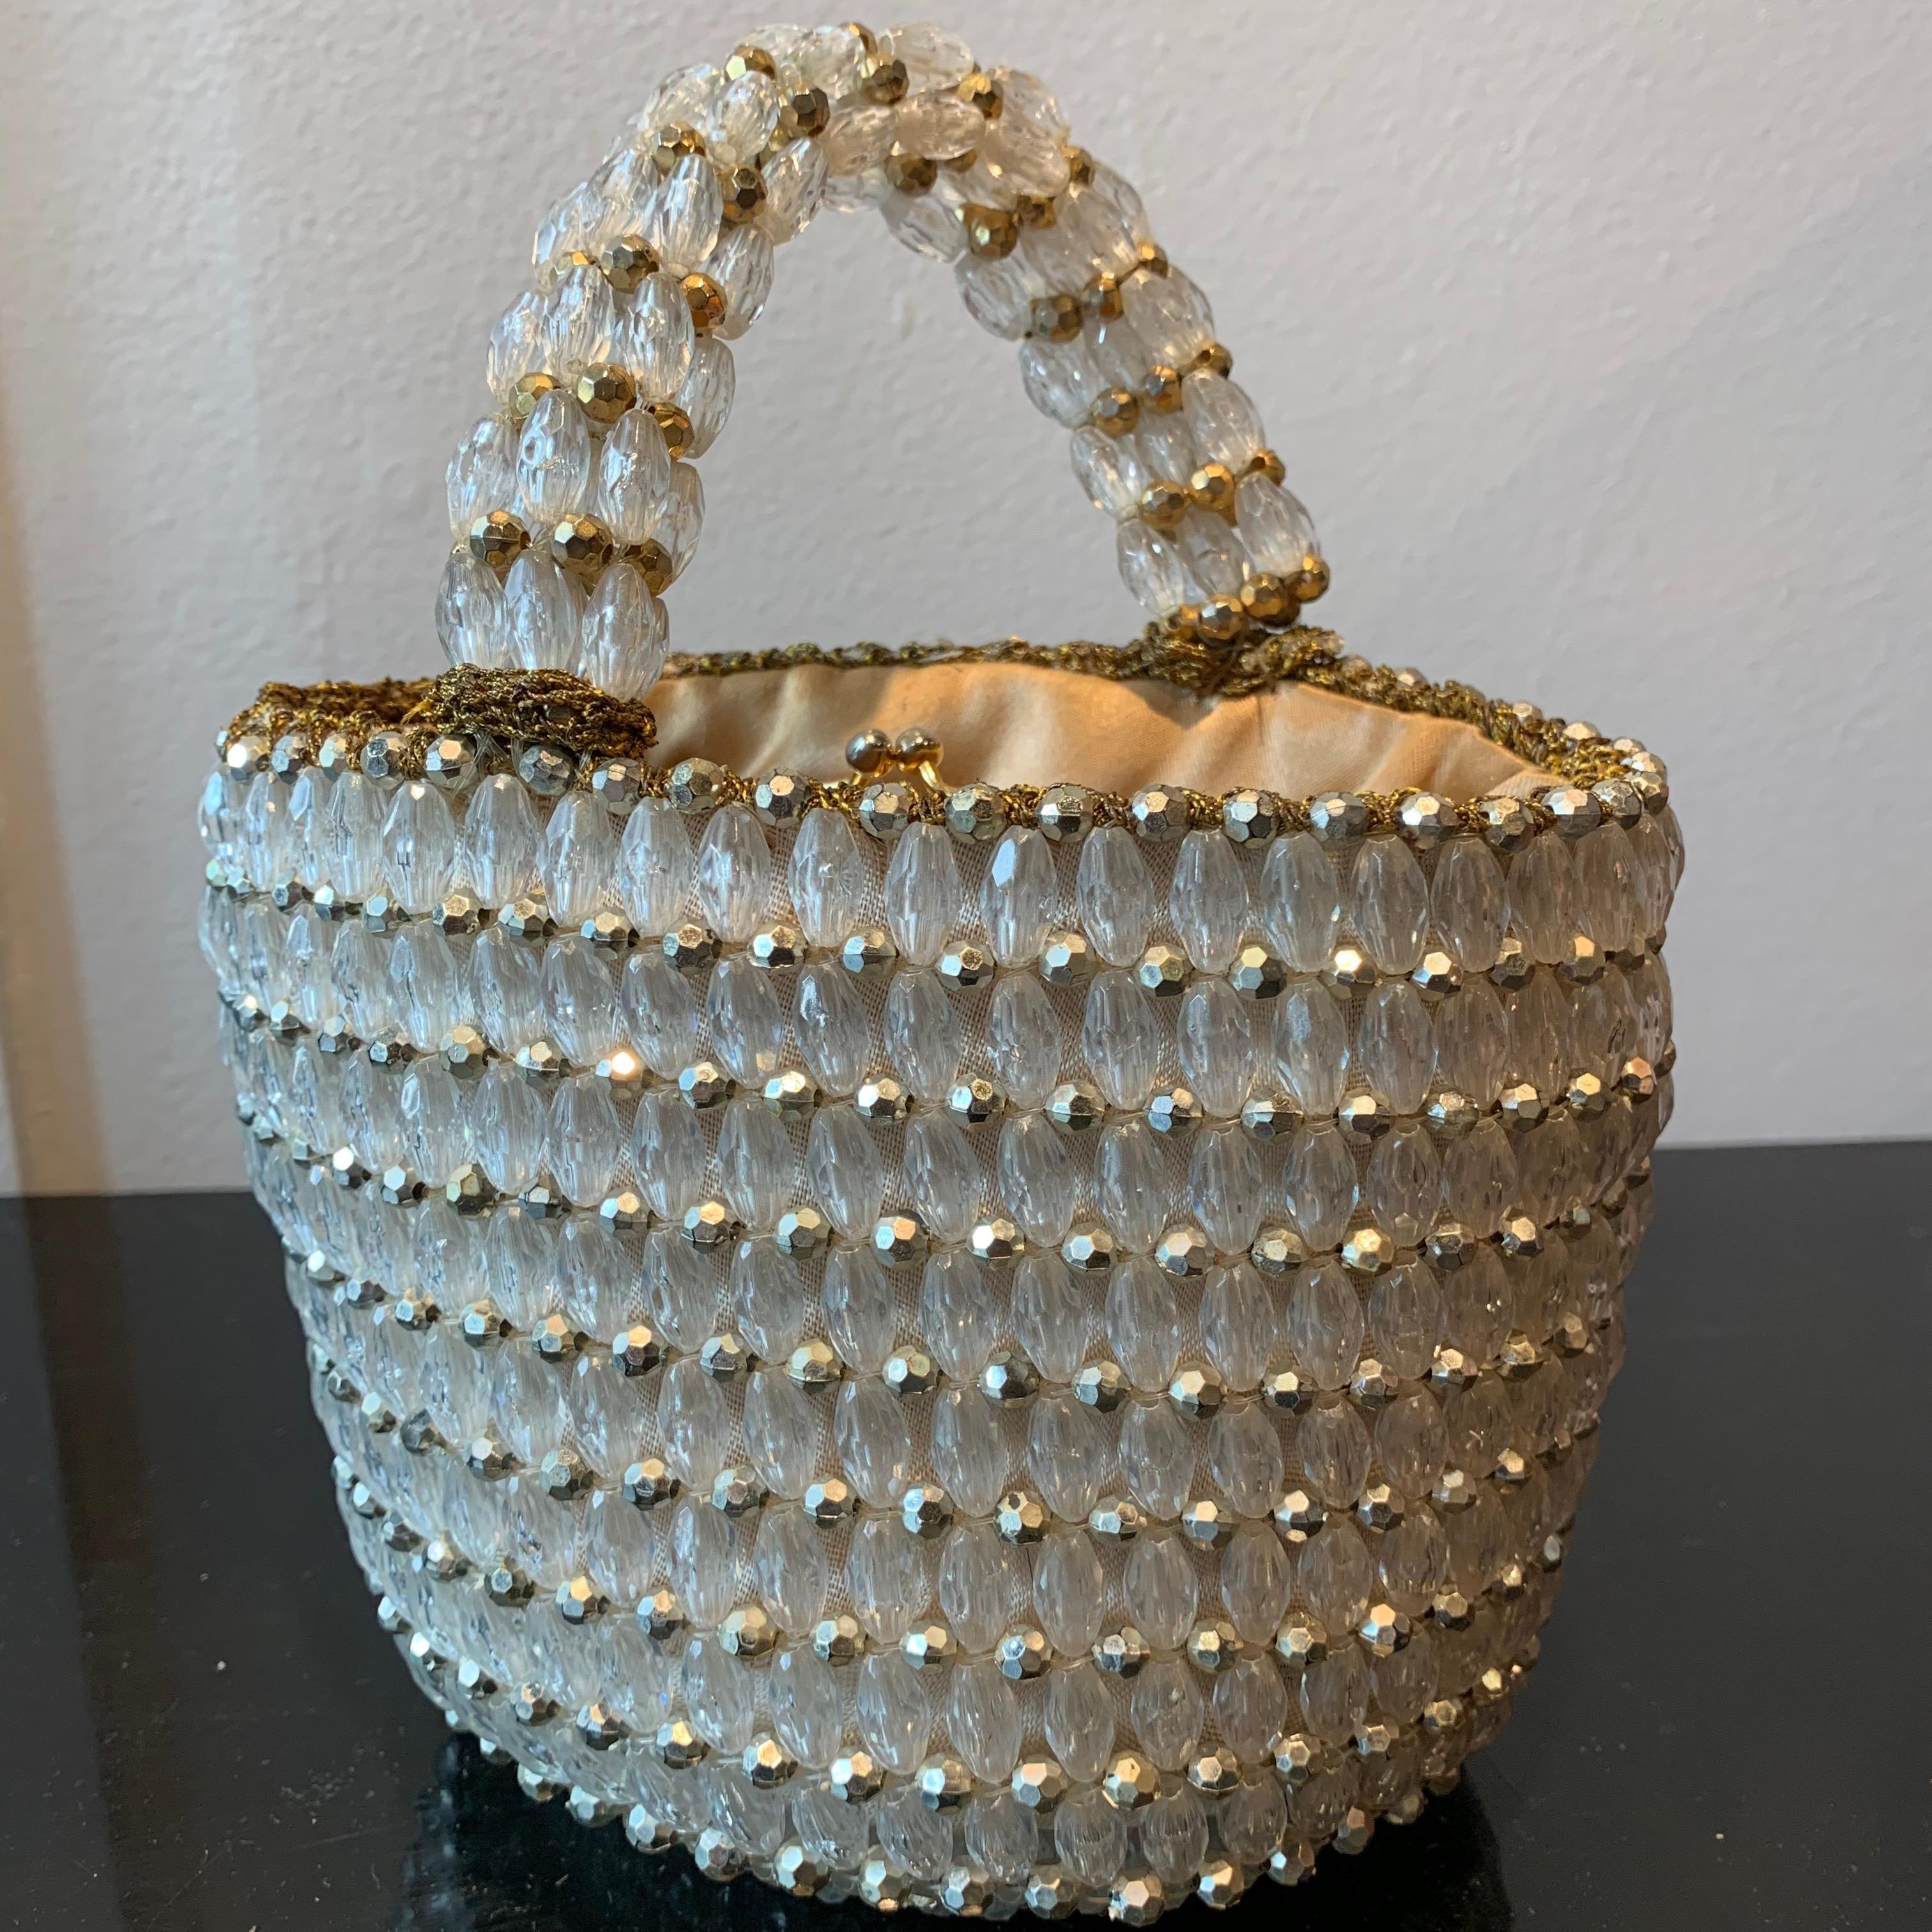 1960s Rosenfeld Italian Lucite Beaded Resort Hand Basket Purse W/ Lamé Crochet. Interior is gold satin with a kiss-clasp kangaroo-pouch pocket. Minor spotting, not noticable, in bottom corner of interior. 